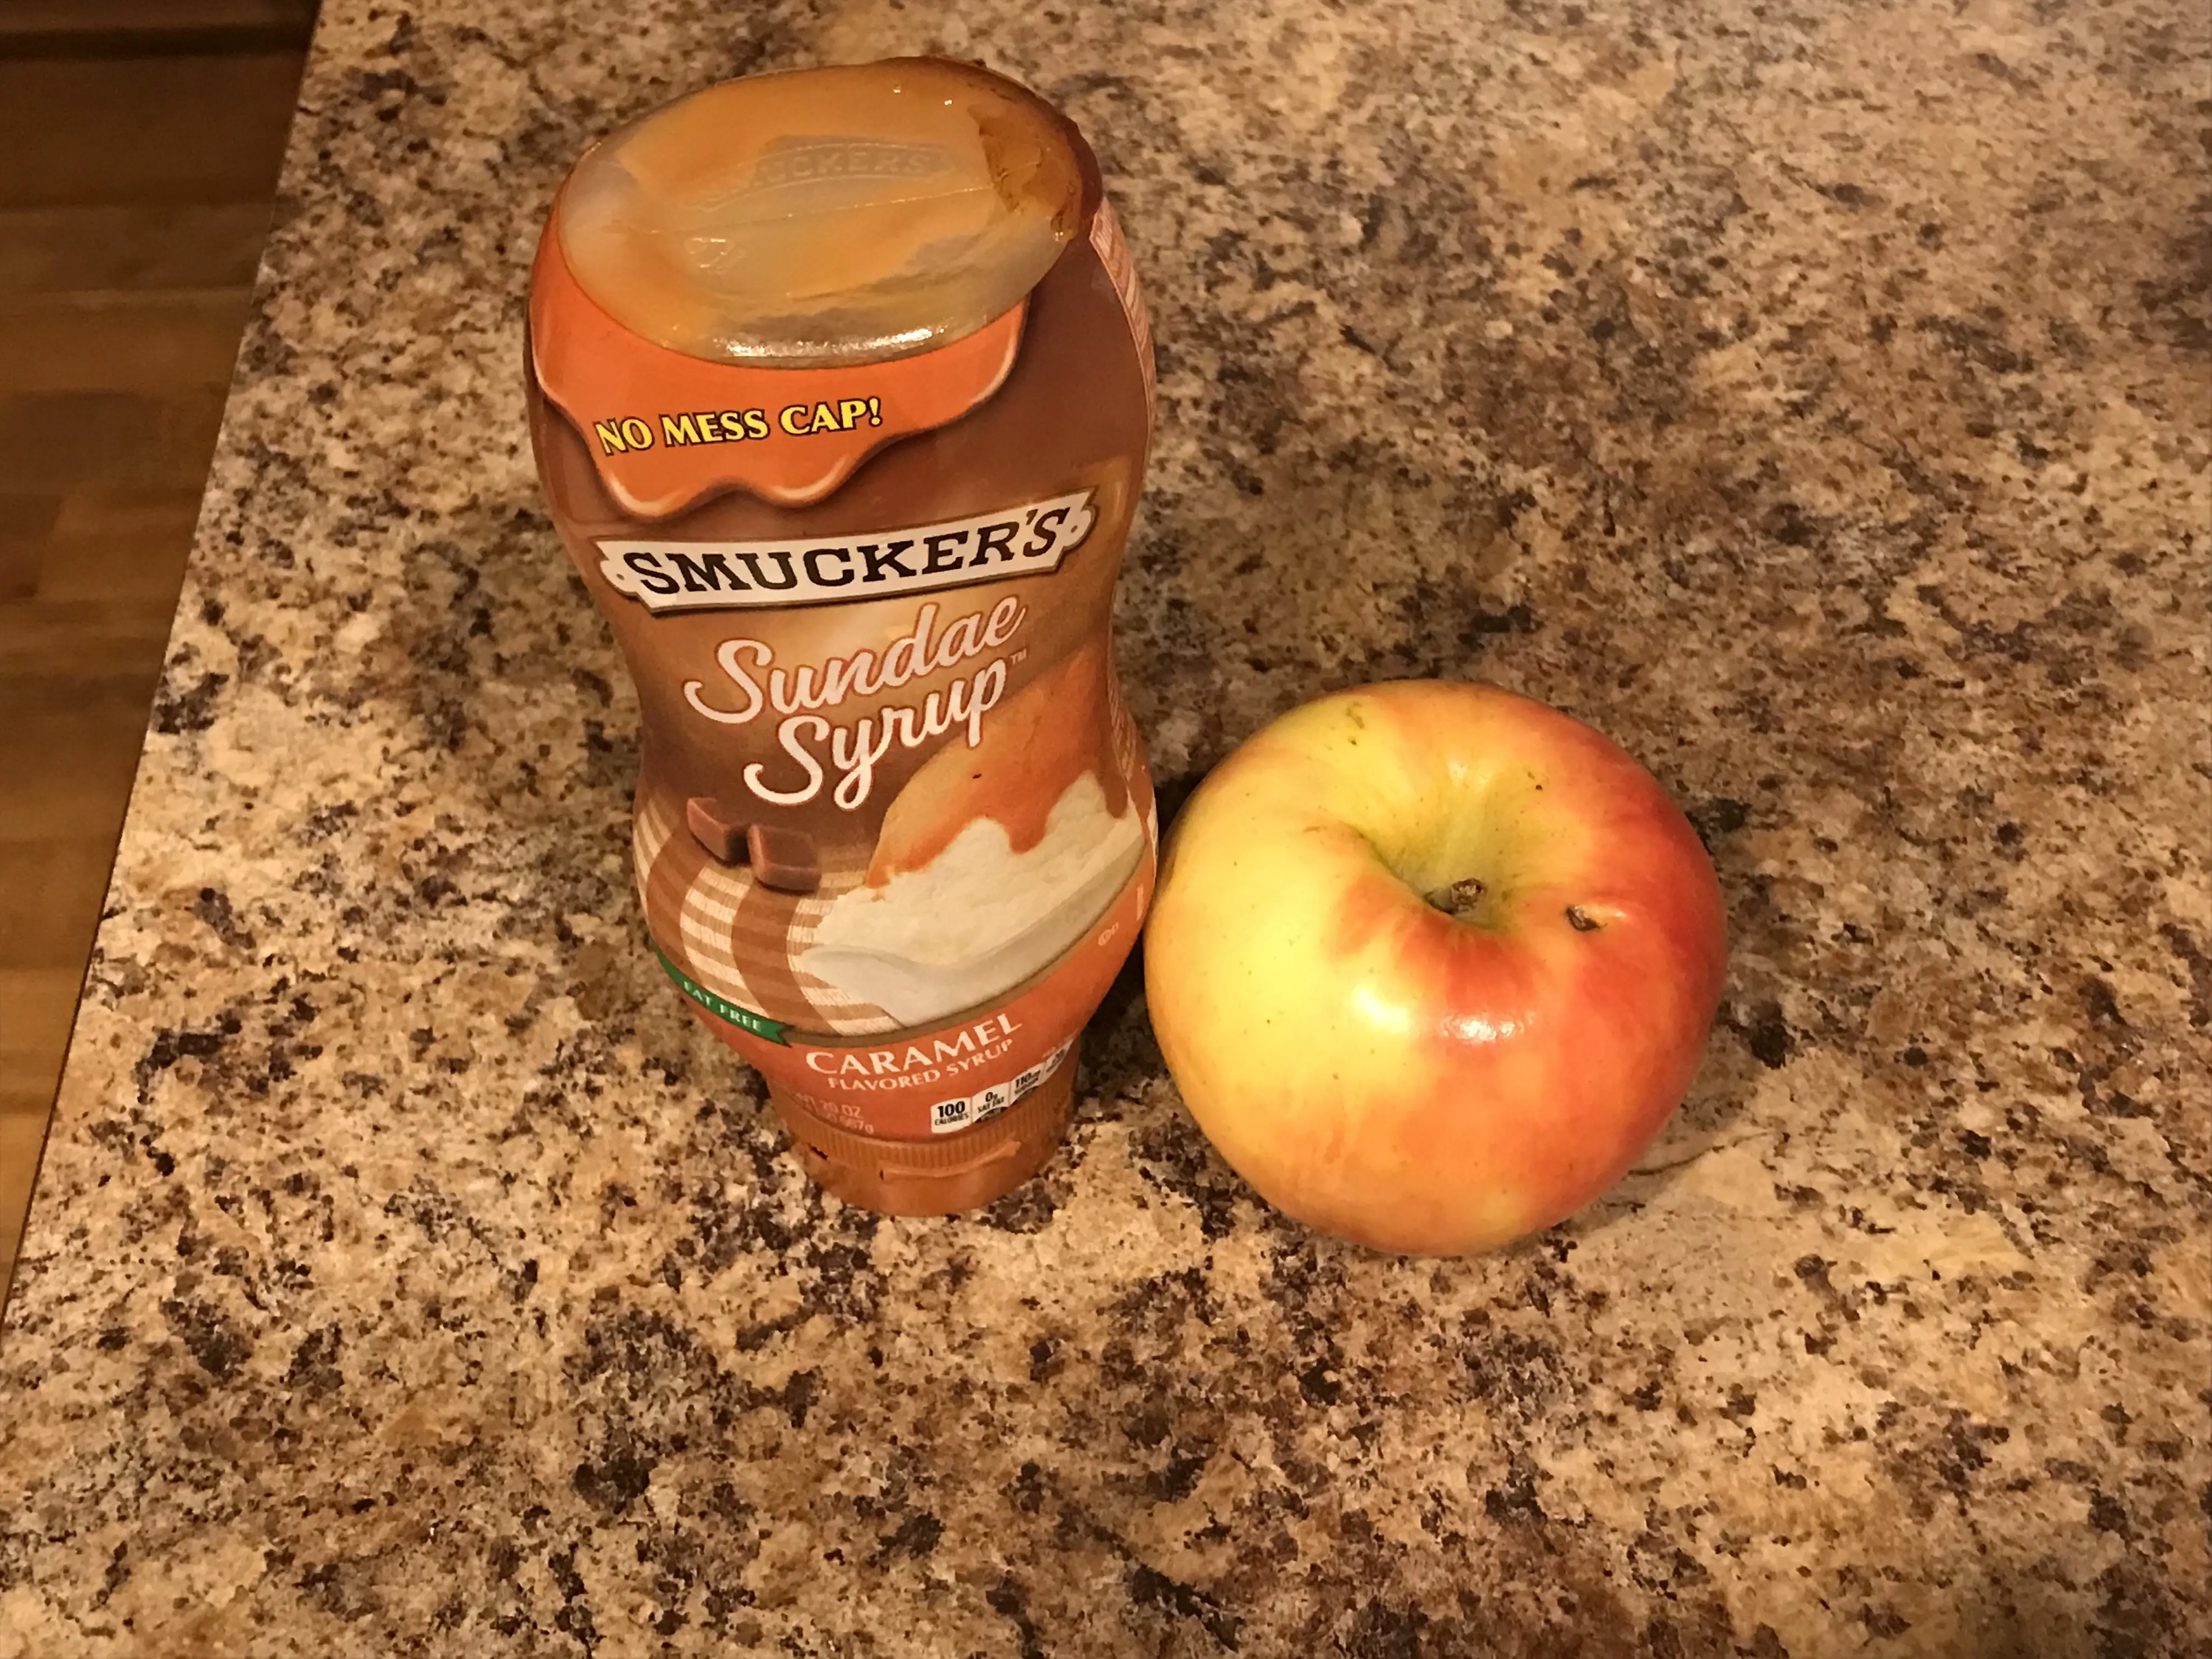 The best and fastest snack of all time apple and caramel snack. You must have just apples and caramel sauce to make this delicious treat.